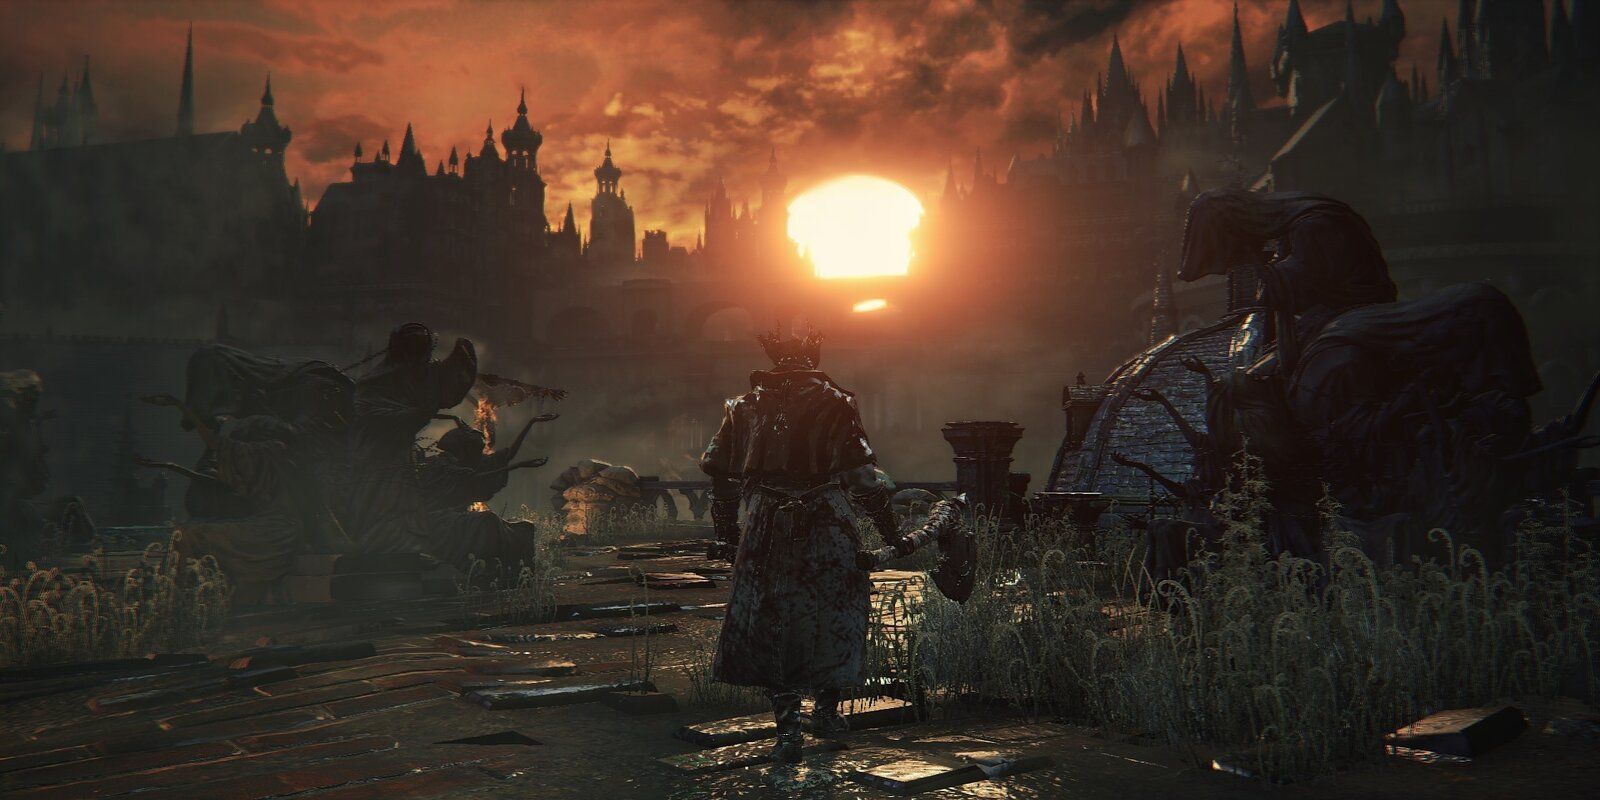 The hunter at Old Yharnam.